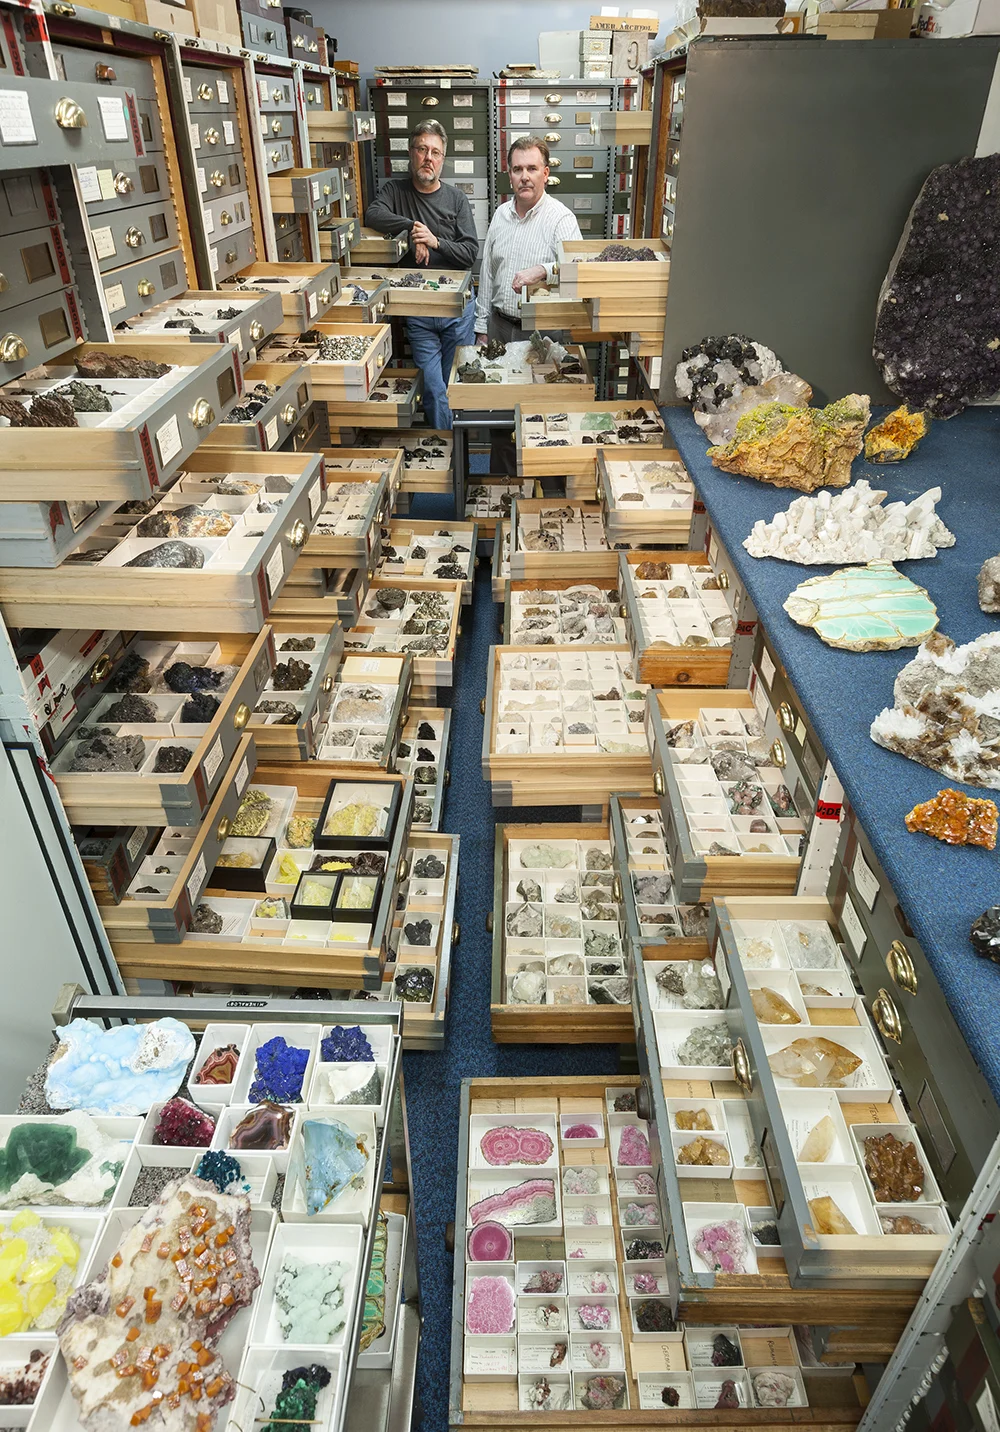 Mineral Sciences Collections in the “Blue Room”